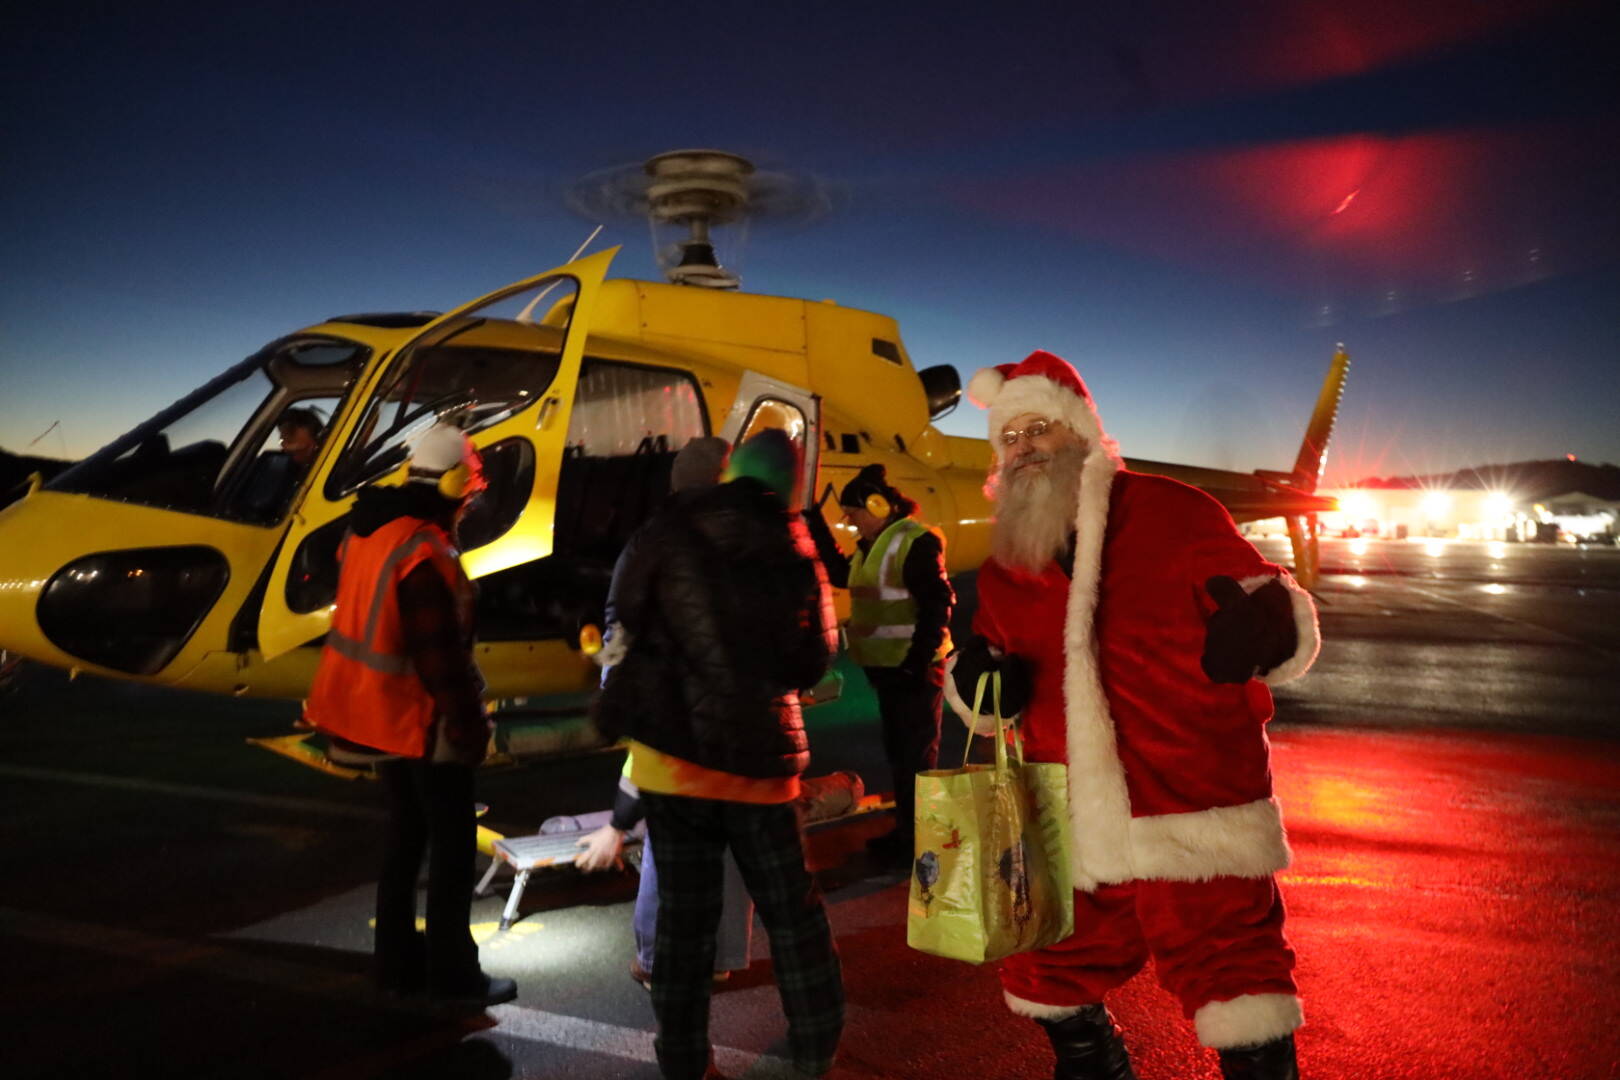 Clarise Larson / Juneau Empire 
Santa steps off of a helicopter at Juneau International Airport for Christmas Light Flights. This year marked a triumphant return for the event which offers people an aerial view of Juneau during the holiday season. Flying time and staffing are donated by Coastal Helicopters and fuel from Petro Marine Services for the event.